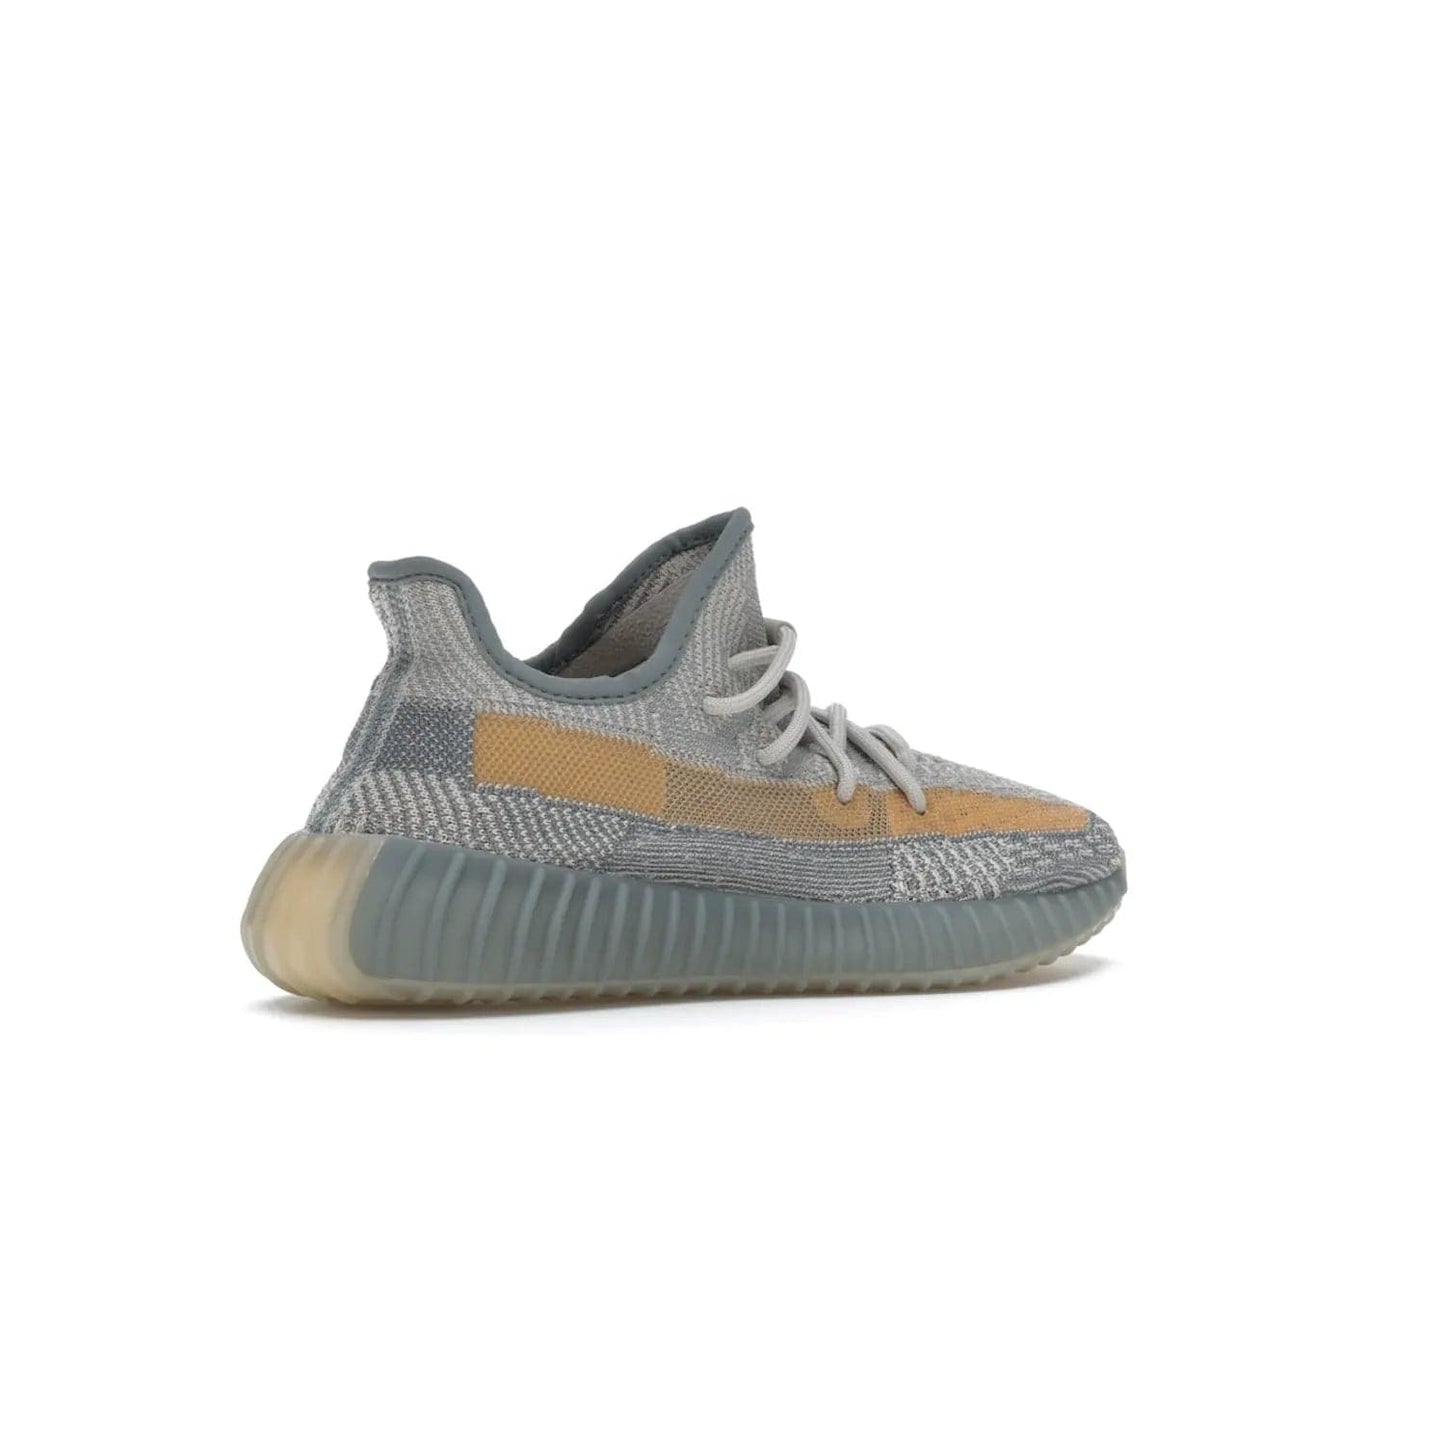 adidas Yeezy Boost 350 V2 Israfil - Image 34 - Only at www.BallersClubKickz.com - The adidas Yeezy Boost 350 V2 Israfil provides a unique style with a triple colorway and multi-colored threads. Featuring BOOST cushioning in a translucent midsole, this must-have sneaker drops in August 2020.